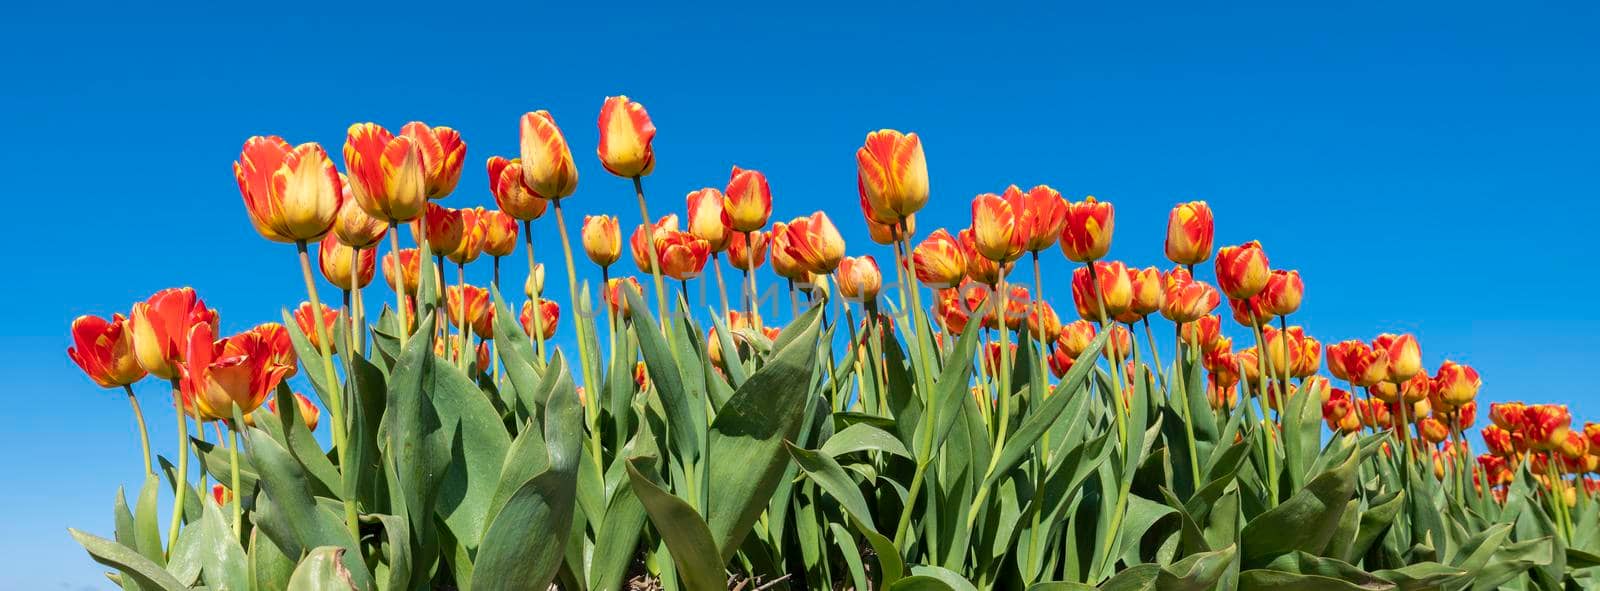 red and yellow tulips in field under blue sky by ahavelaar